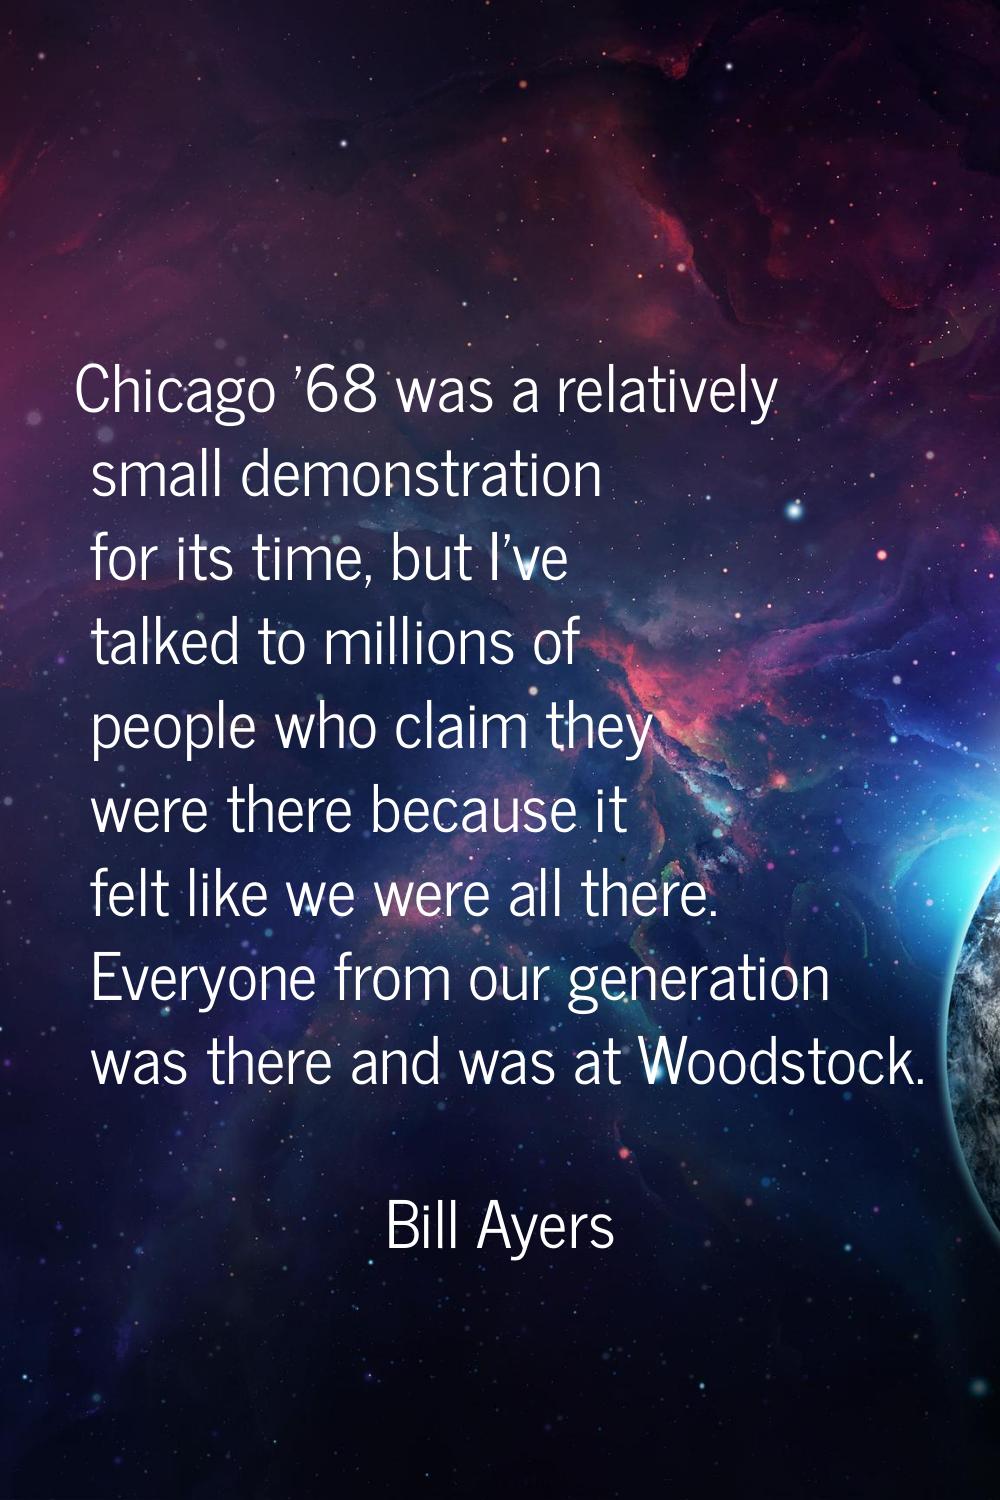 Chicago '68 was a relatively small demonstration for its time, but I've talked to millions of peopl